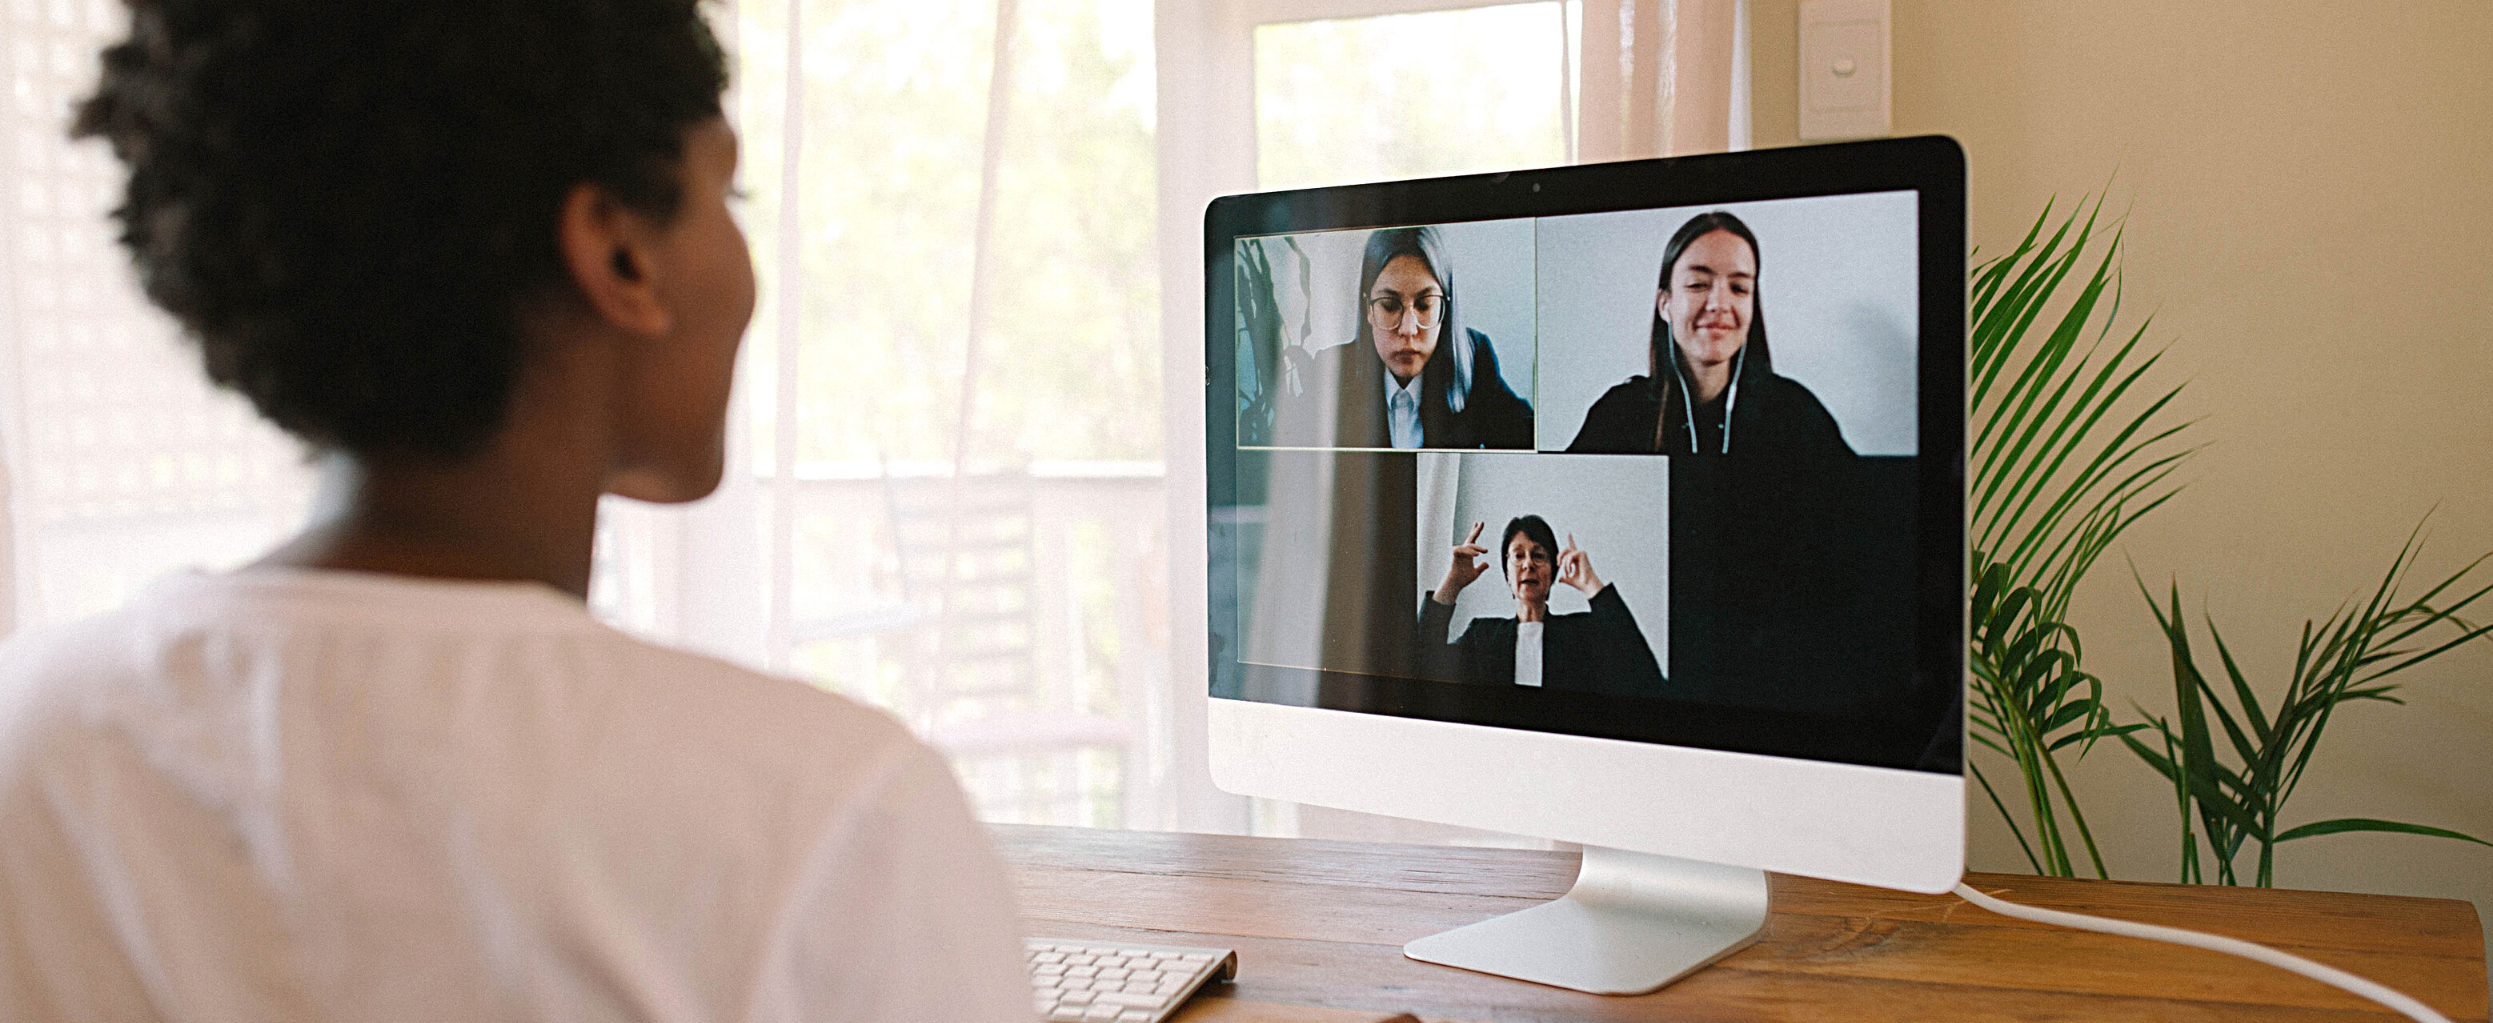 Women participating in a Zoom meeting with three other women